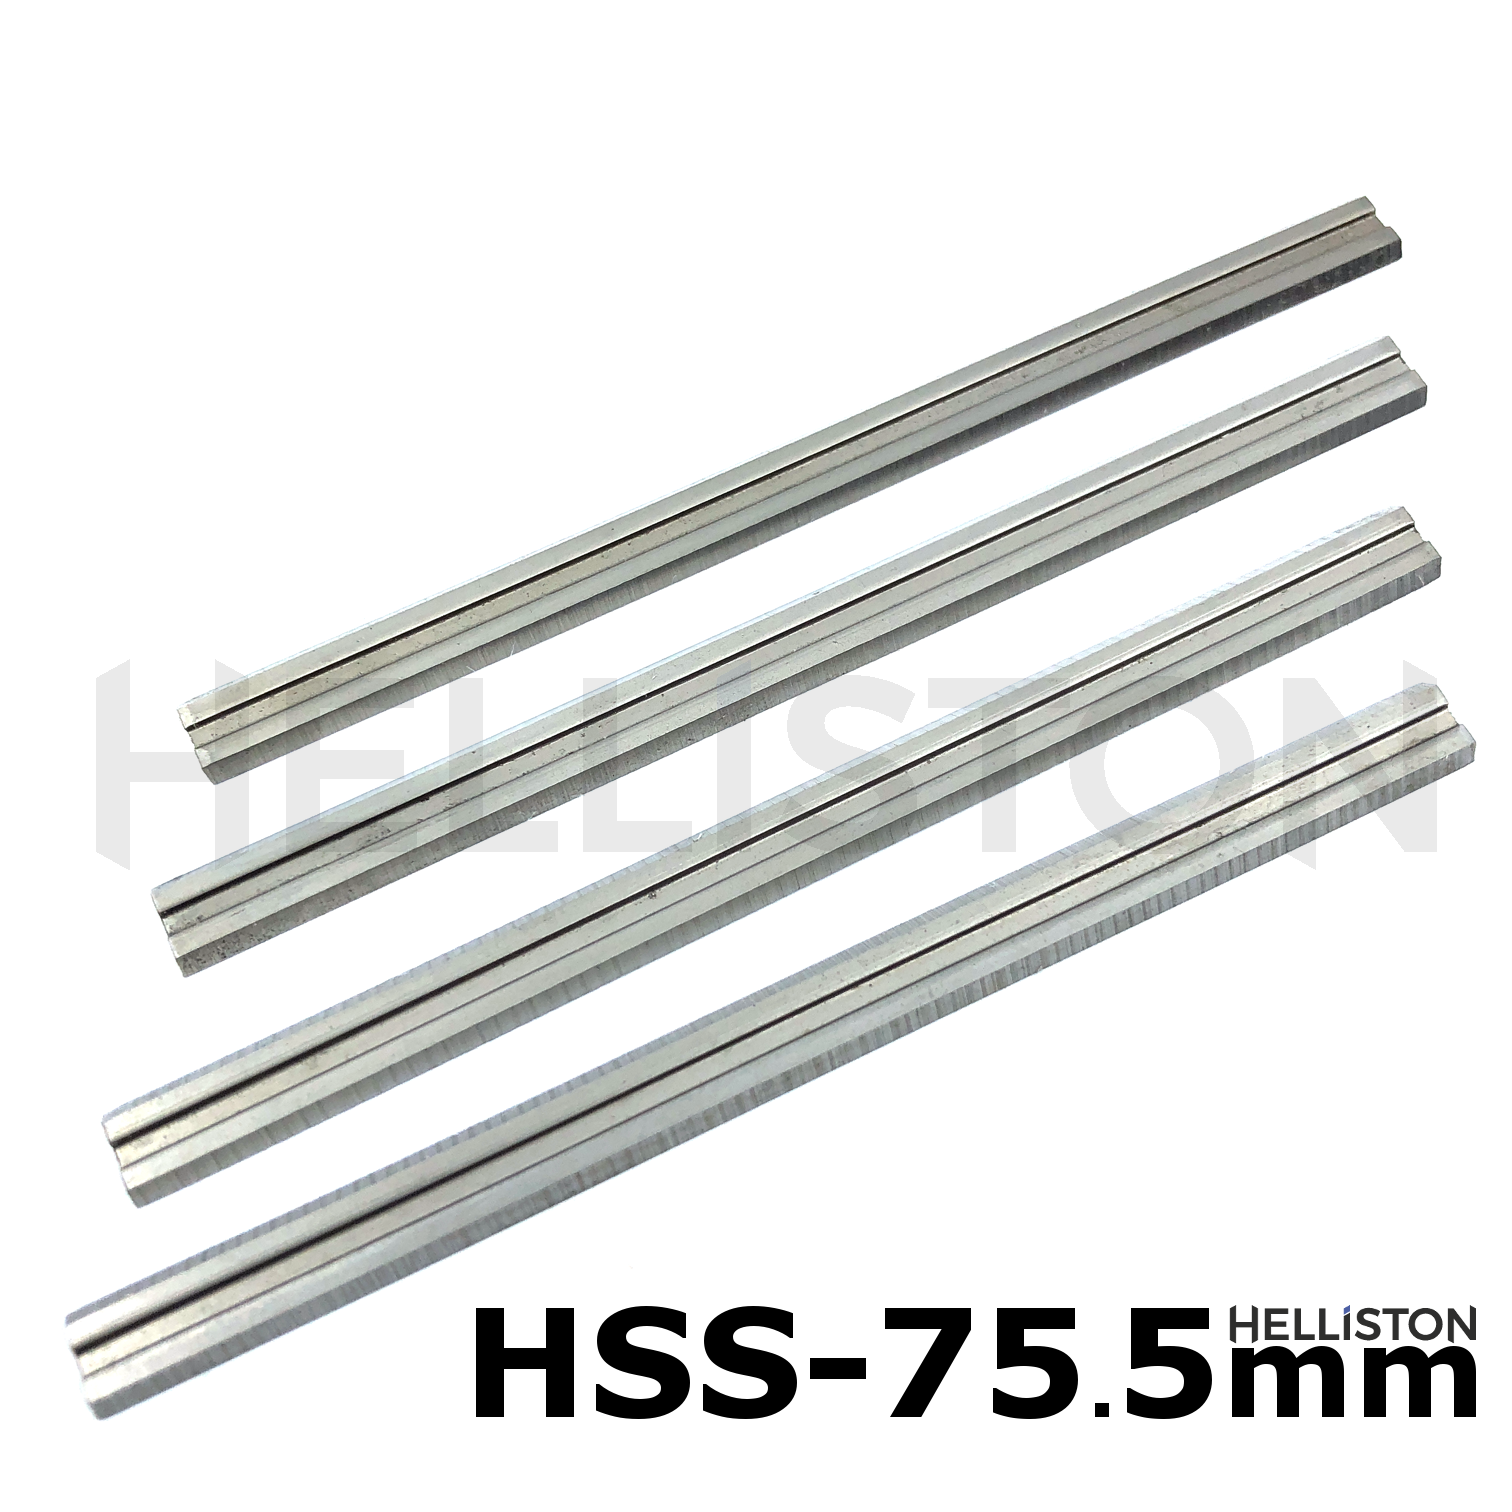 HSS Planer Blades, Reversible Knives 75,5 x 5,5 x 1,1 mm, High-speed-steel, double-sided blades for electrical hand planers AEG HTH 75 Bosch 0590, 1590, 1591, P400 Festo REP 75 Haffner FH222 Holz-Her 2223, 2286, 2320 Kress Jet Star 6701 Mafell HU 75 Metabo 6375 Scheer MH80, MH 75/3